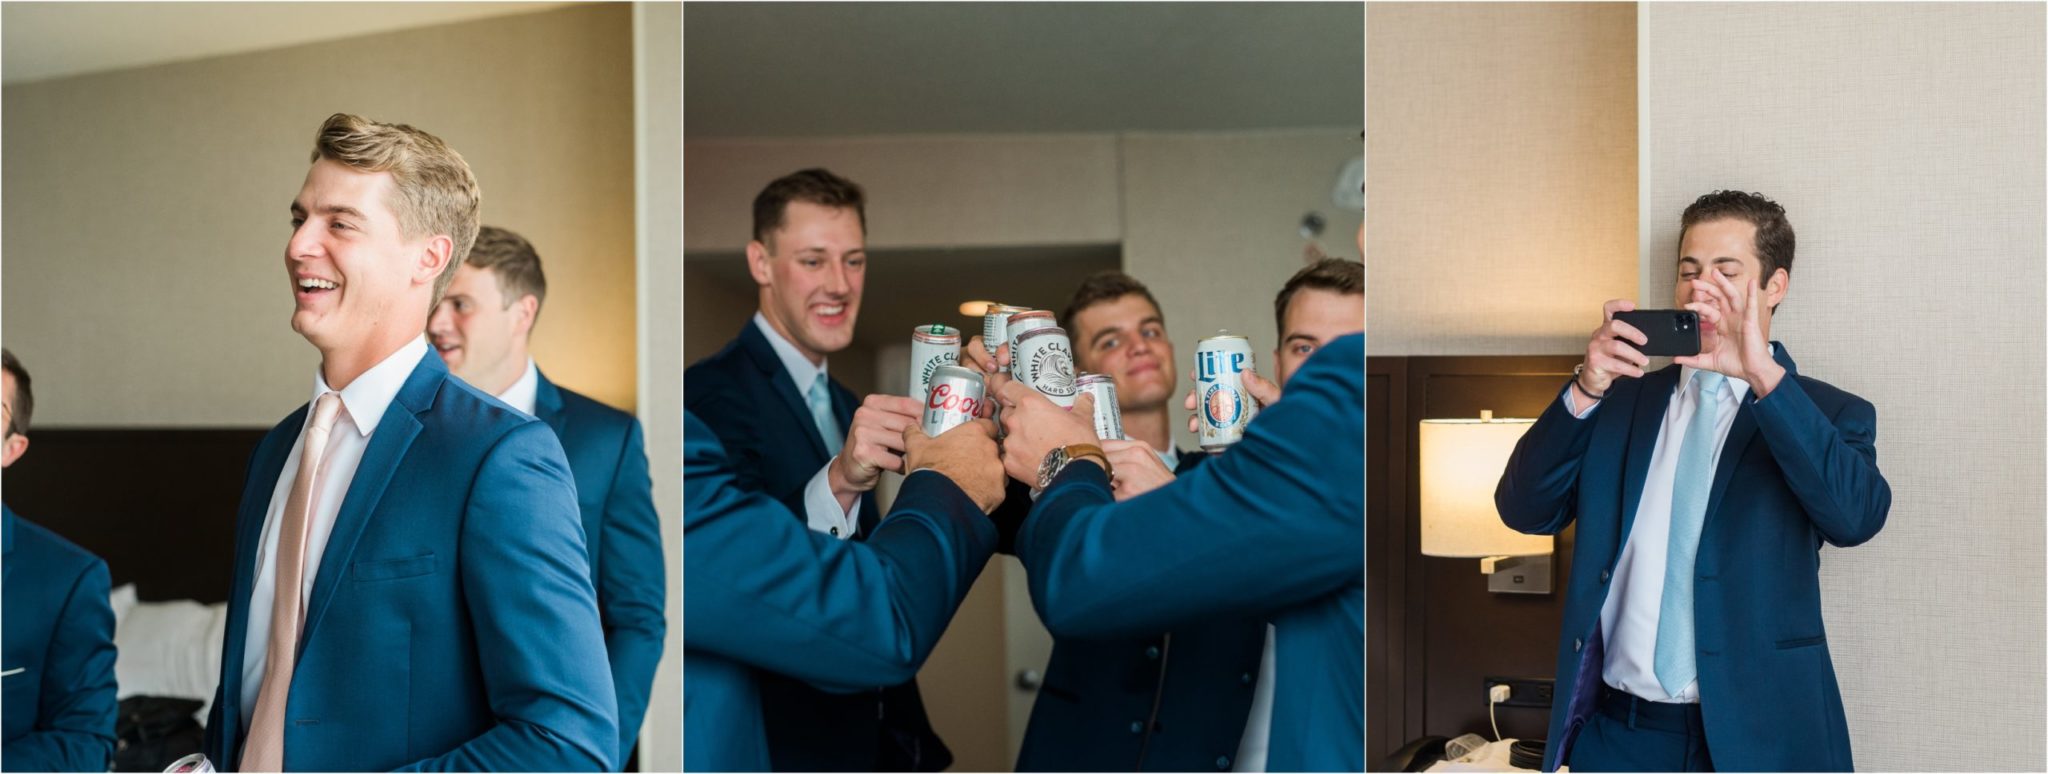 a collaged image of groomsmen cheersing on wedding day